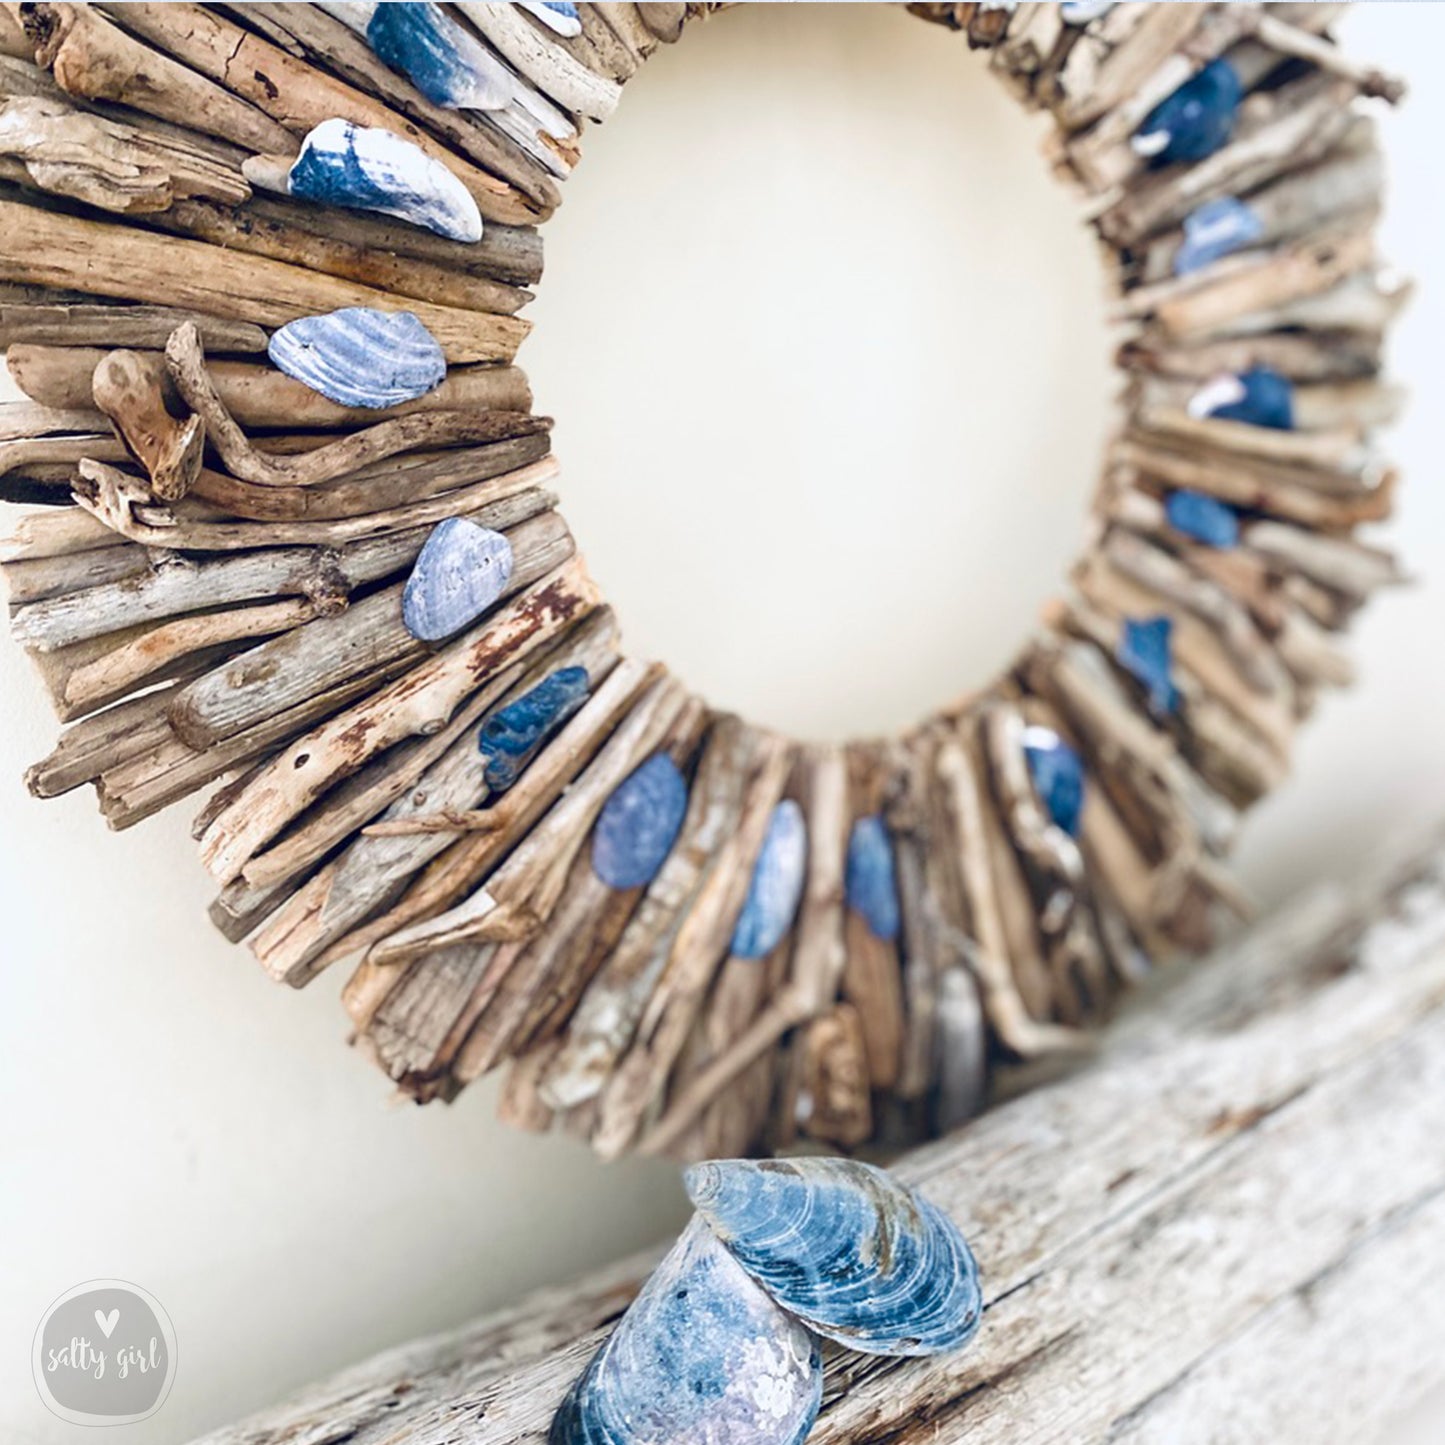 Driftwood Wreath with Indigo Blue Maine Mussel Shell Accents - Sizes 12" - 16" - 20”